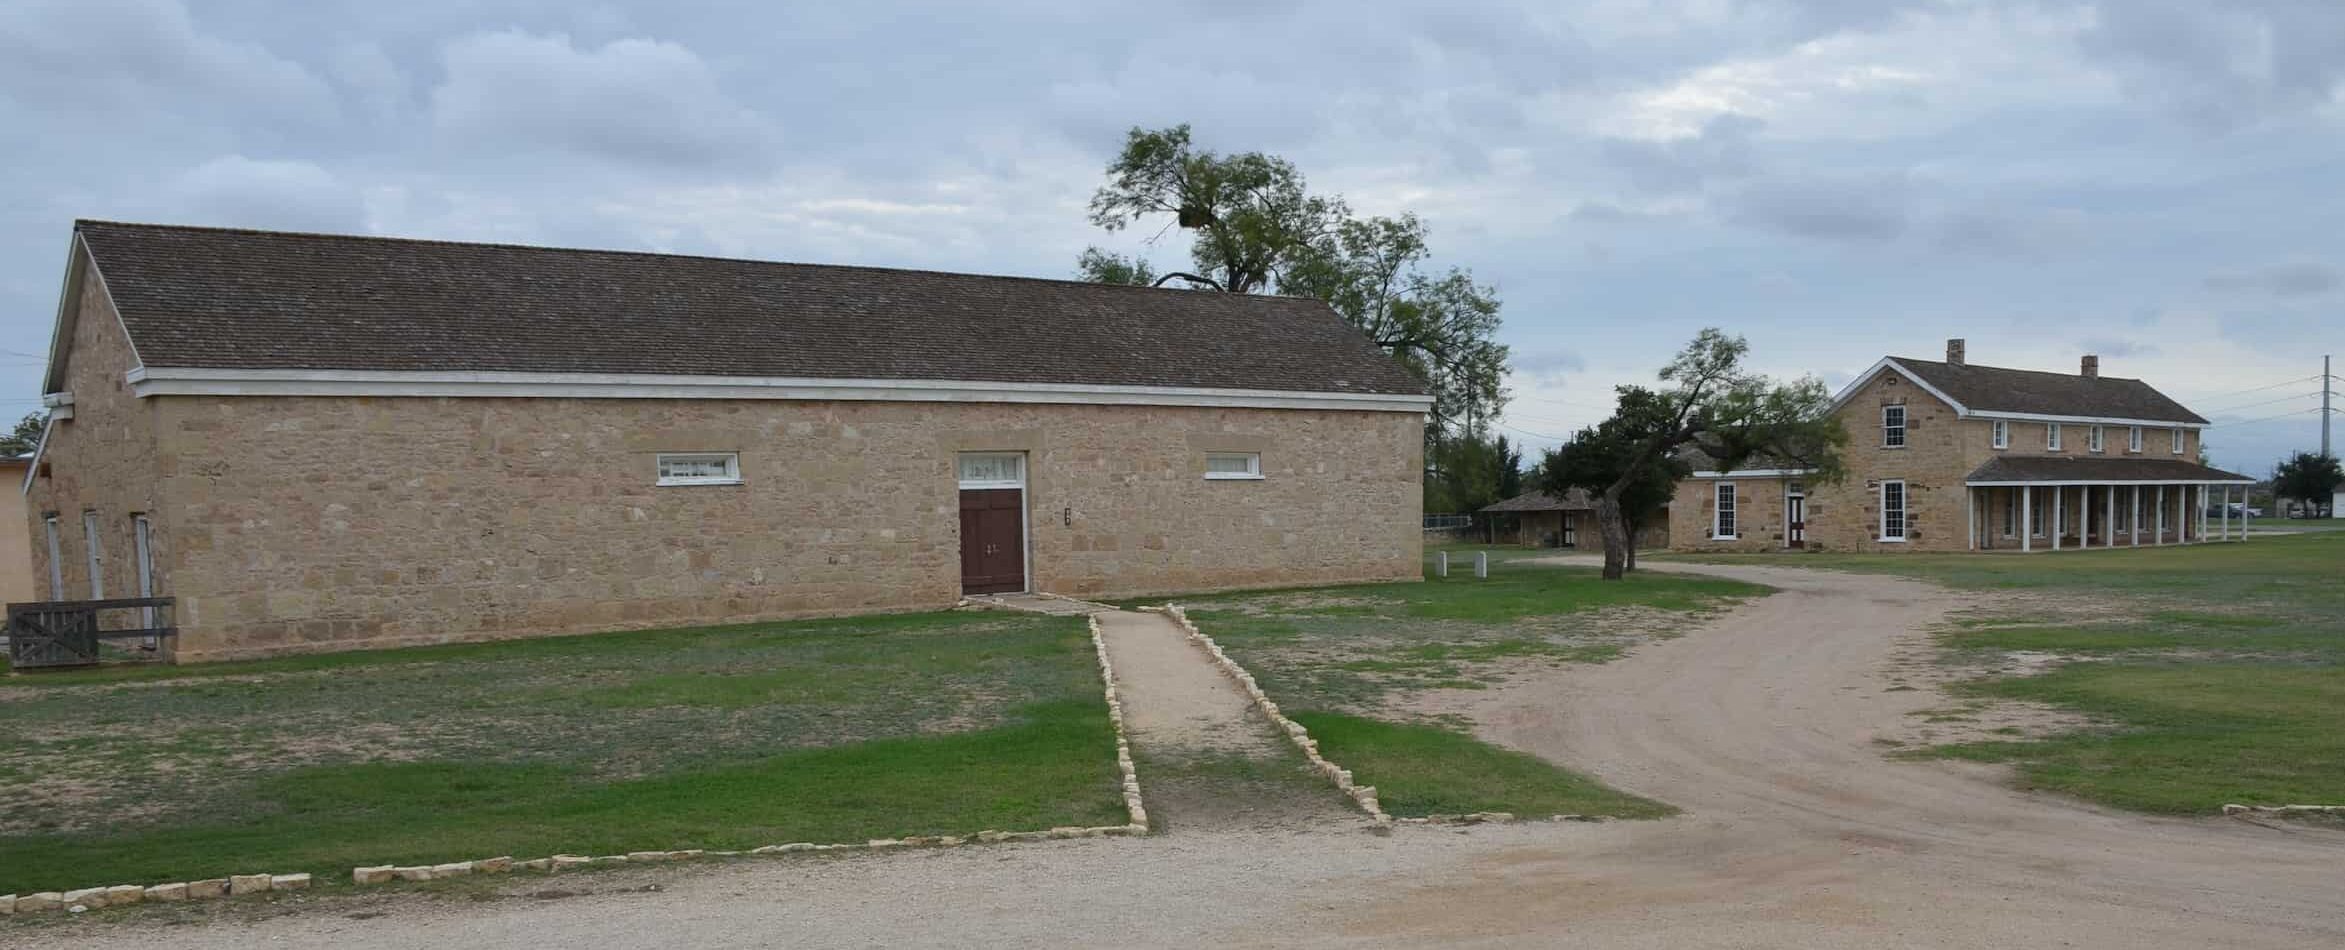 Quartermaster's Storehouse (left) and Headquarters (right)